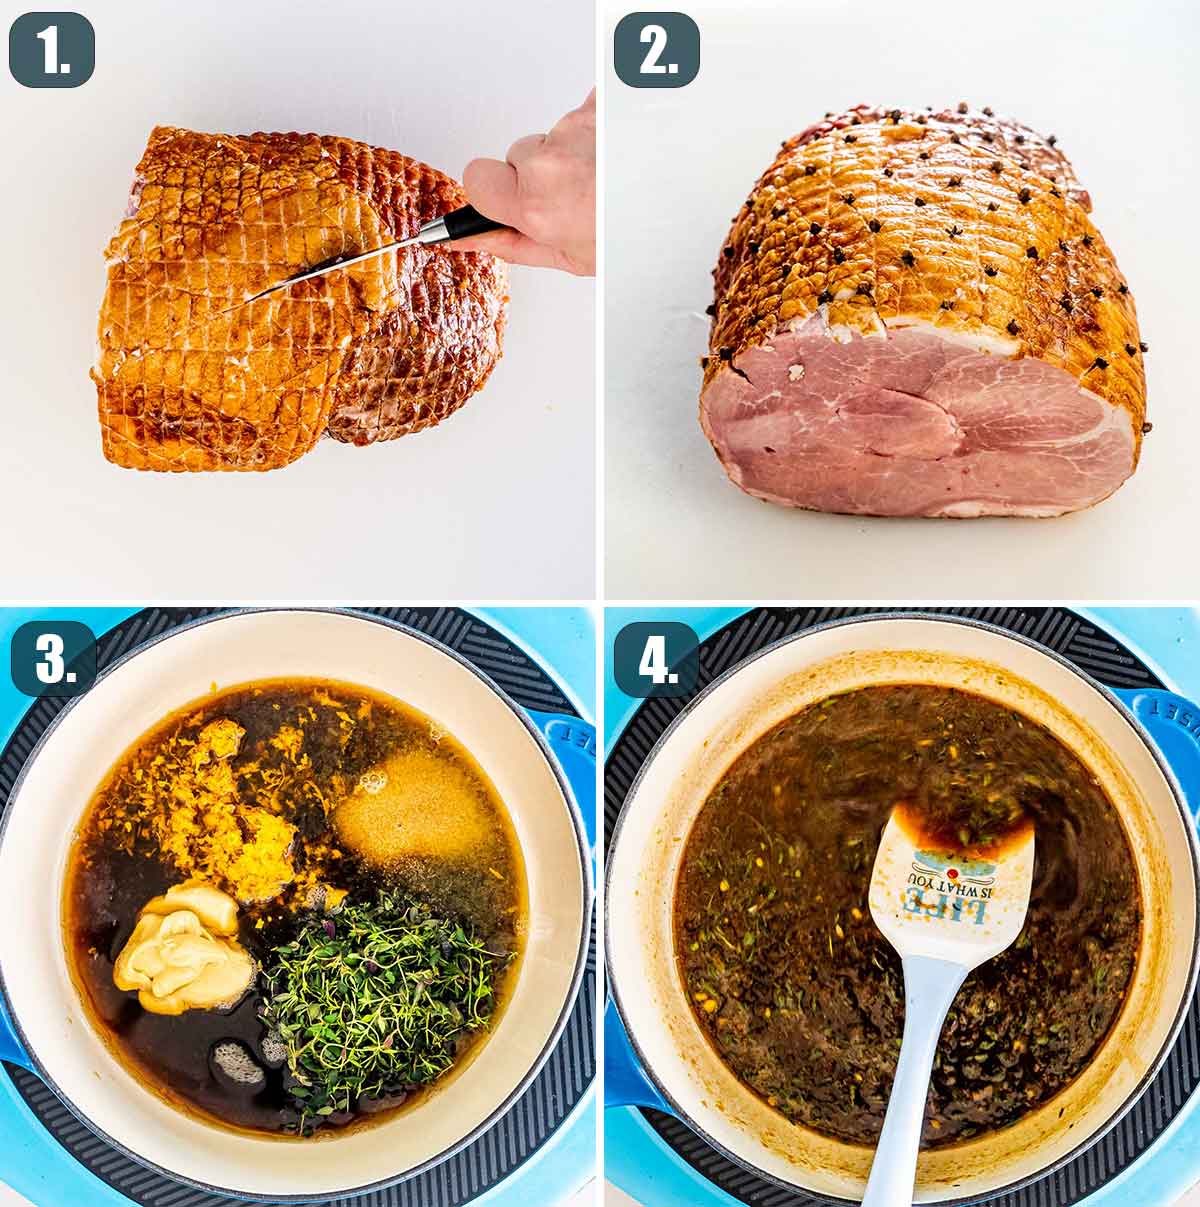 process shots showing how to score ham and make glaze.